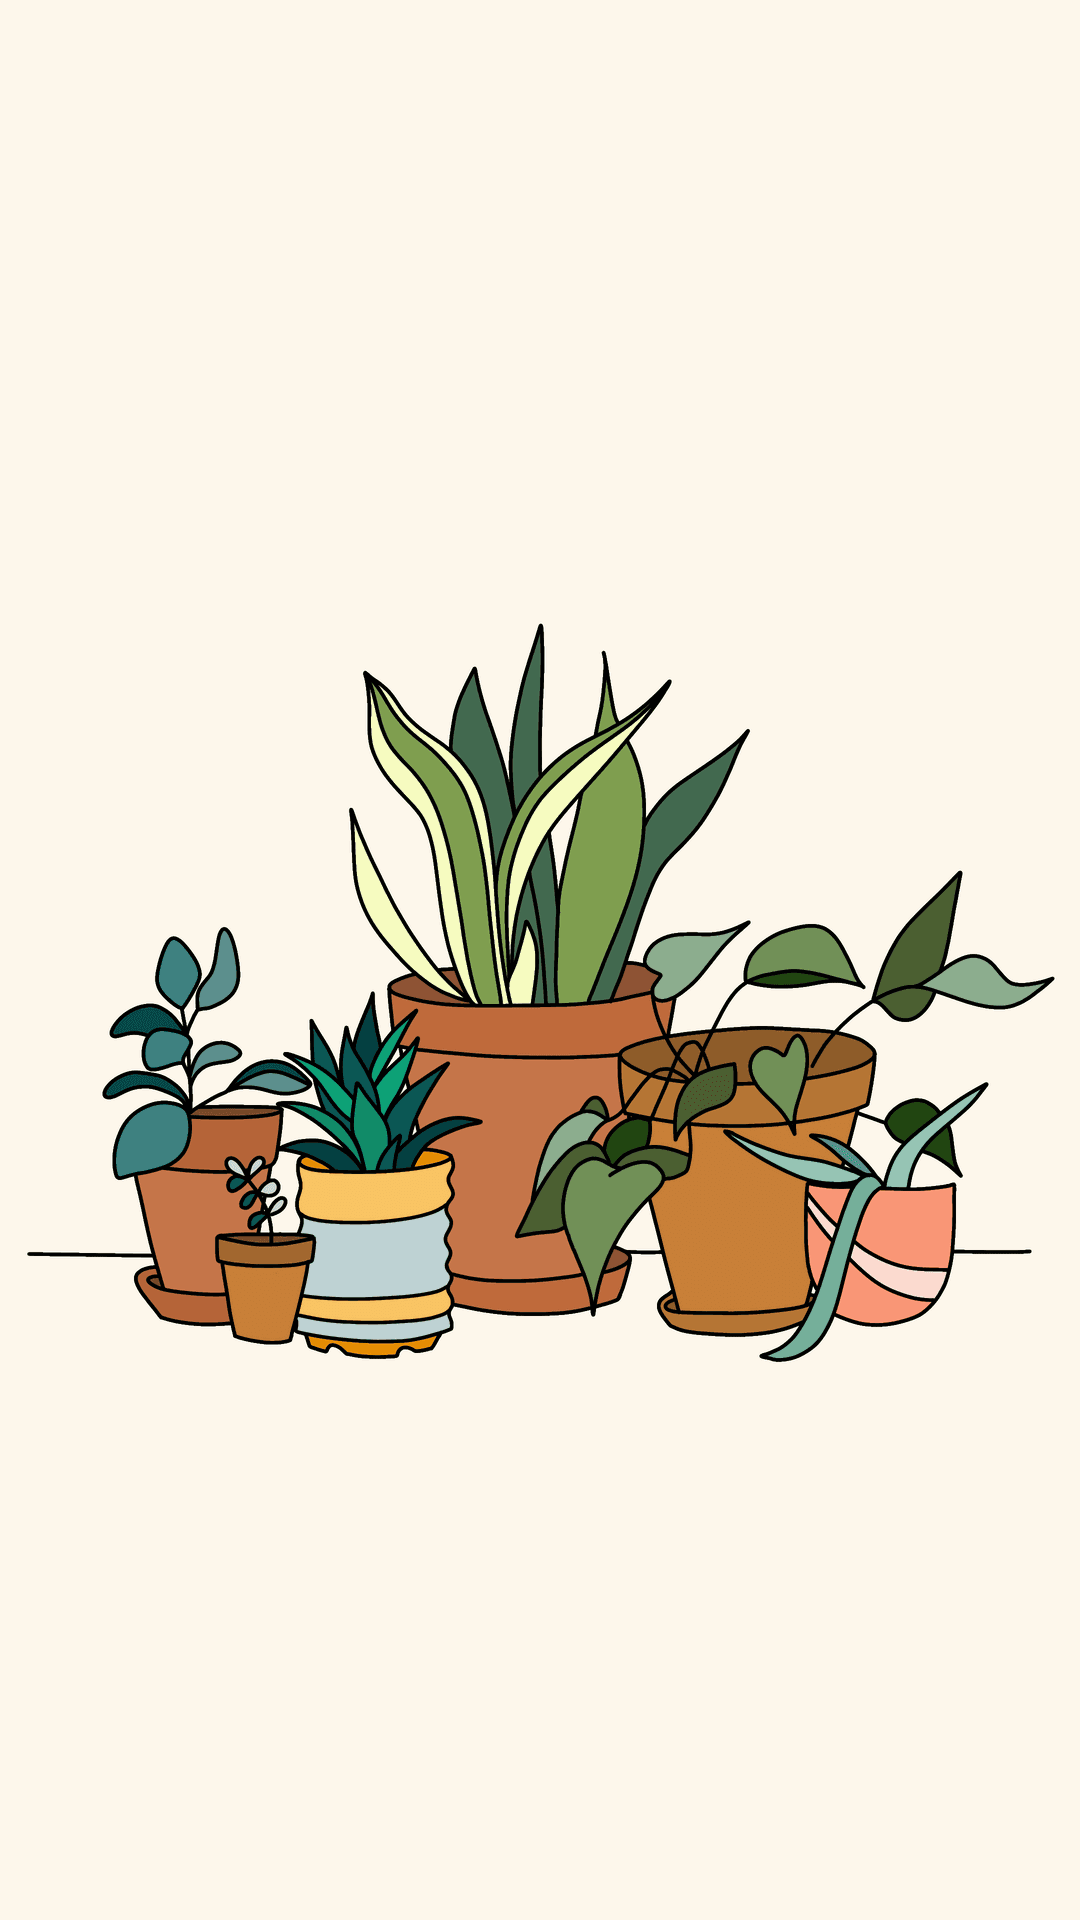 A Set Of Potted Plants In A Row